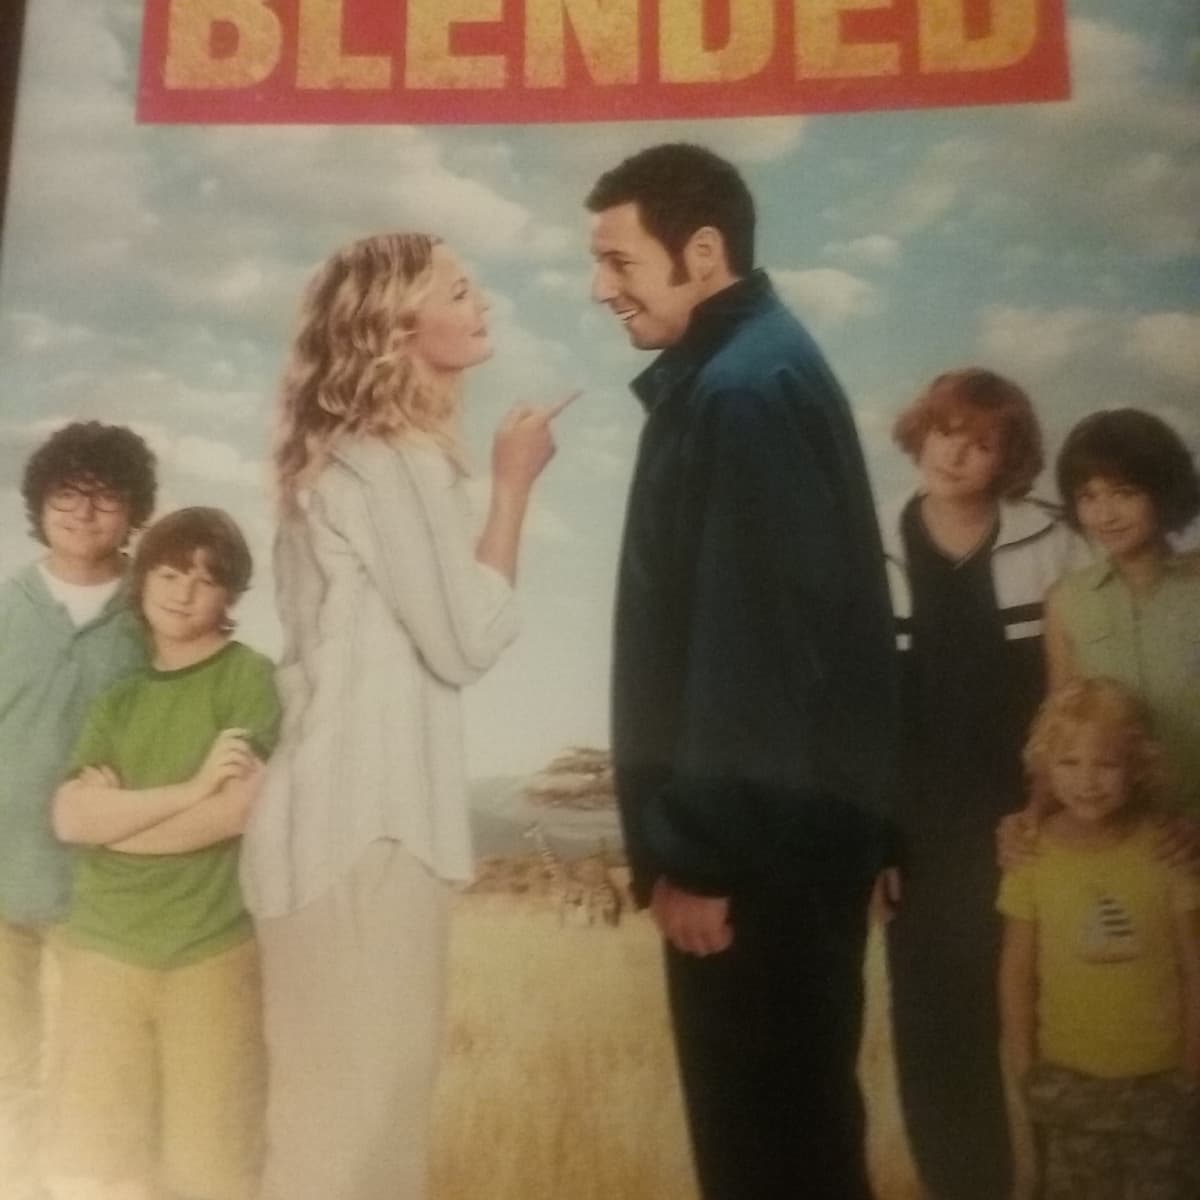 Movie Review Blended the Starring Adam Sandler and Drew Barrymore -